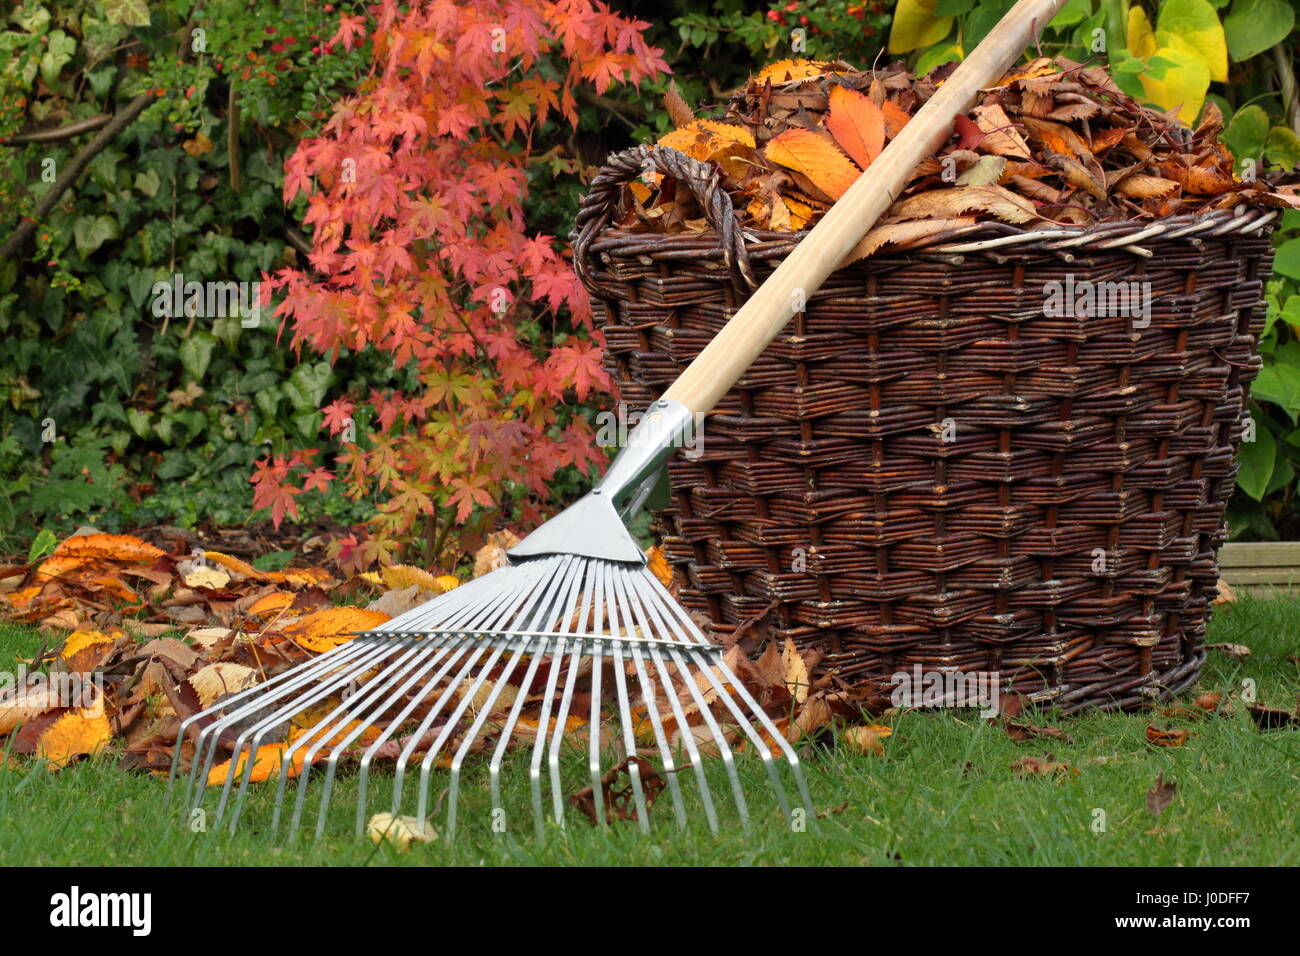 Fallen leaves cleared from a garden lawn into a woven basket on a bright autumn day, UK Stock Photo